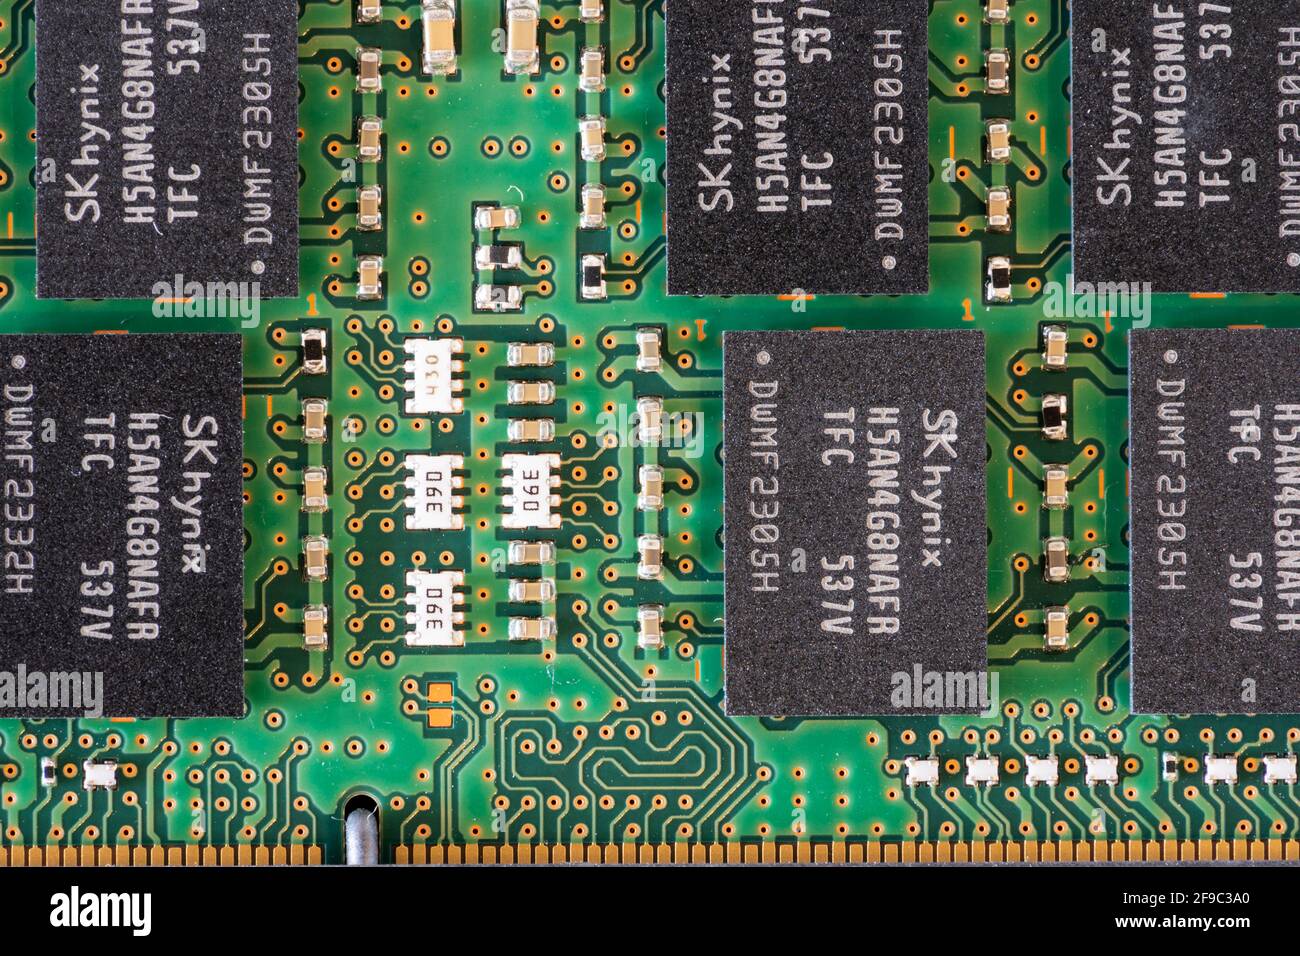 A macro closeup of the motherboard in a Dell laptop showing DRAM (Dynamic Random Access Memory) chips and electronic circuits Stock Photo